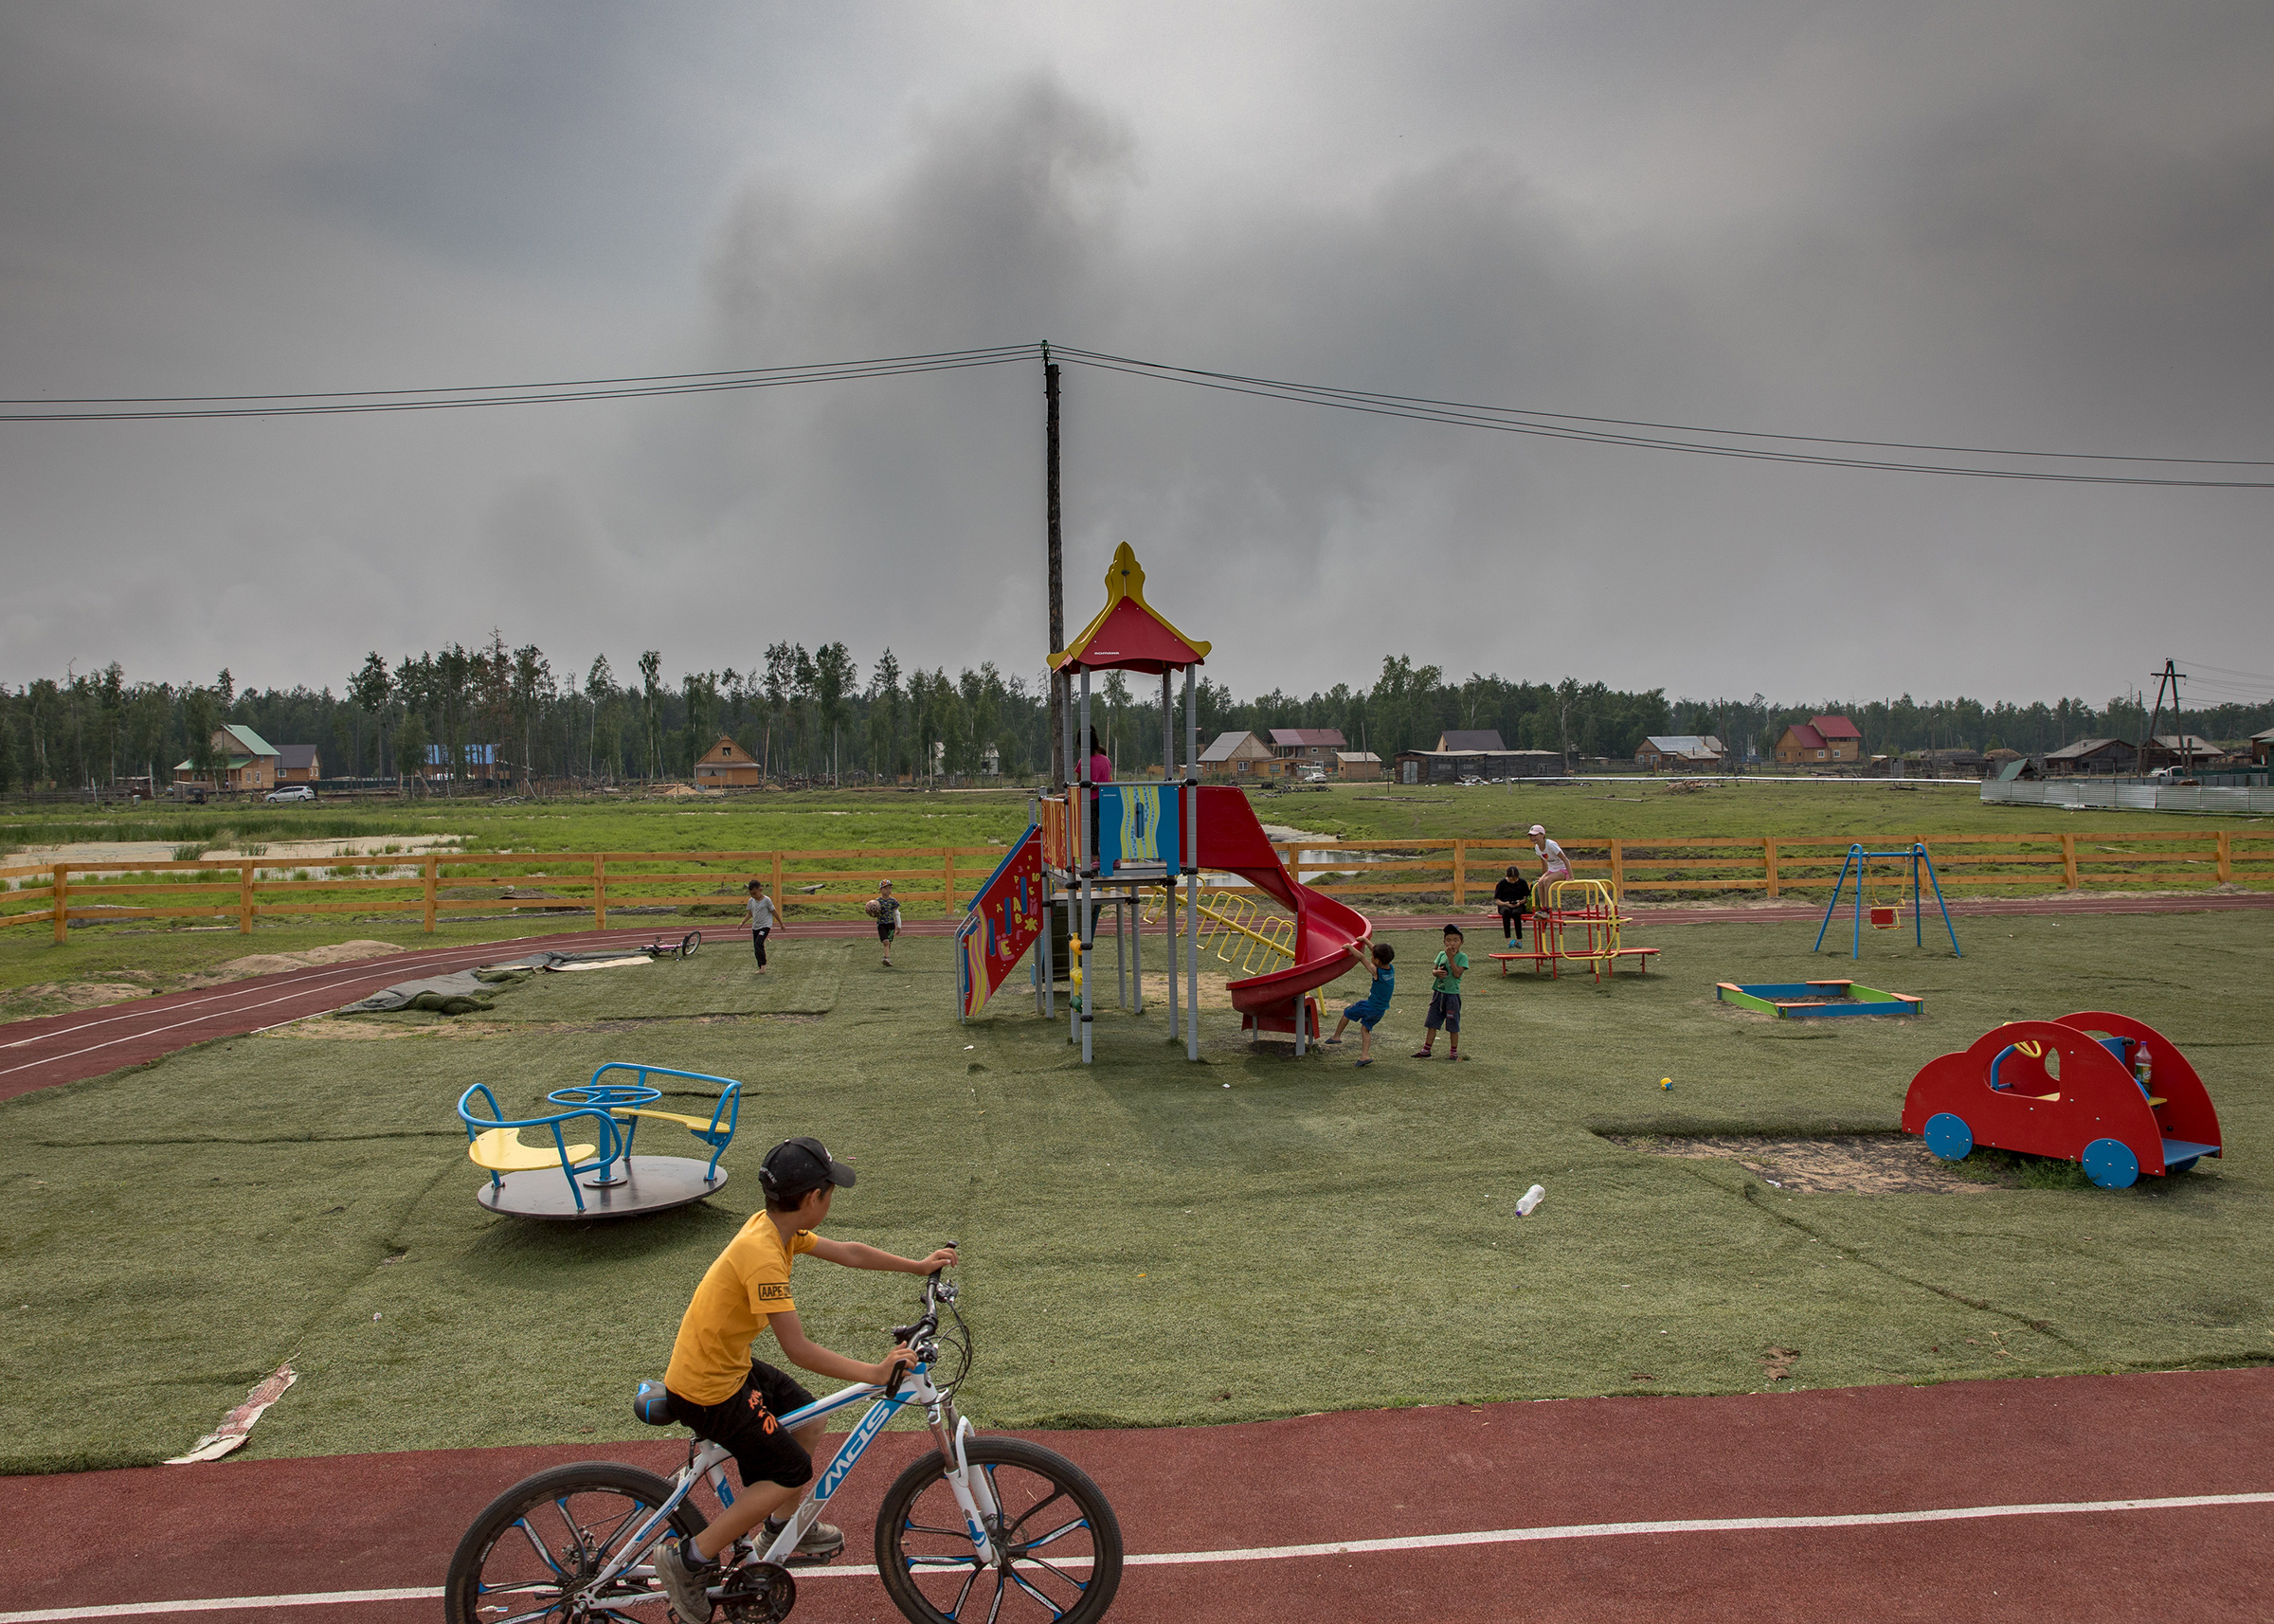 Smoke from a forest fire 3 kilometers away, seen from a playground in the village of Dikimdya. (Alexey Vasilyev)